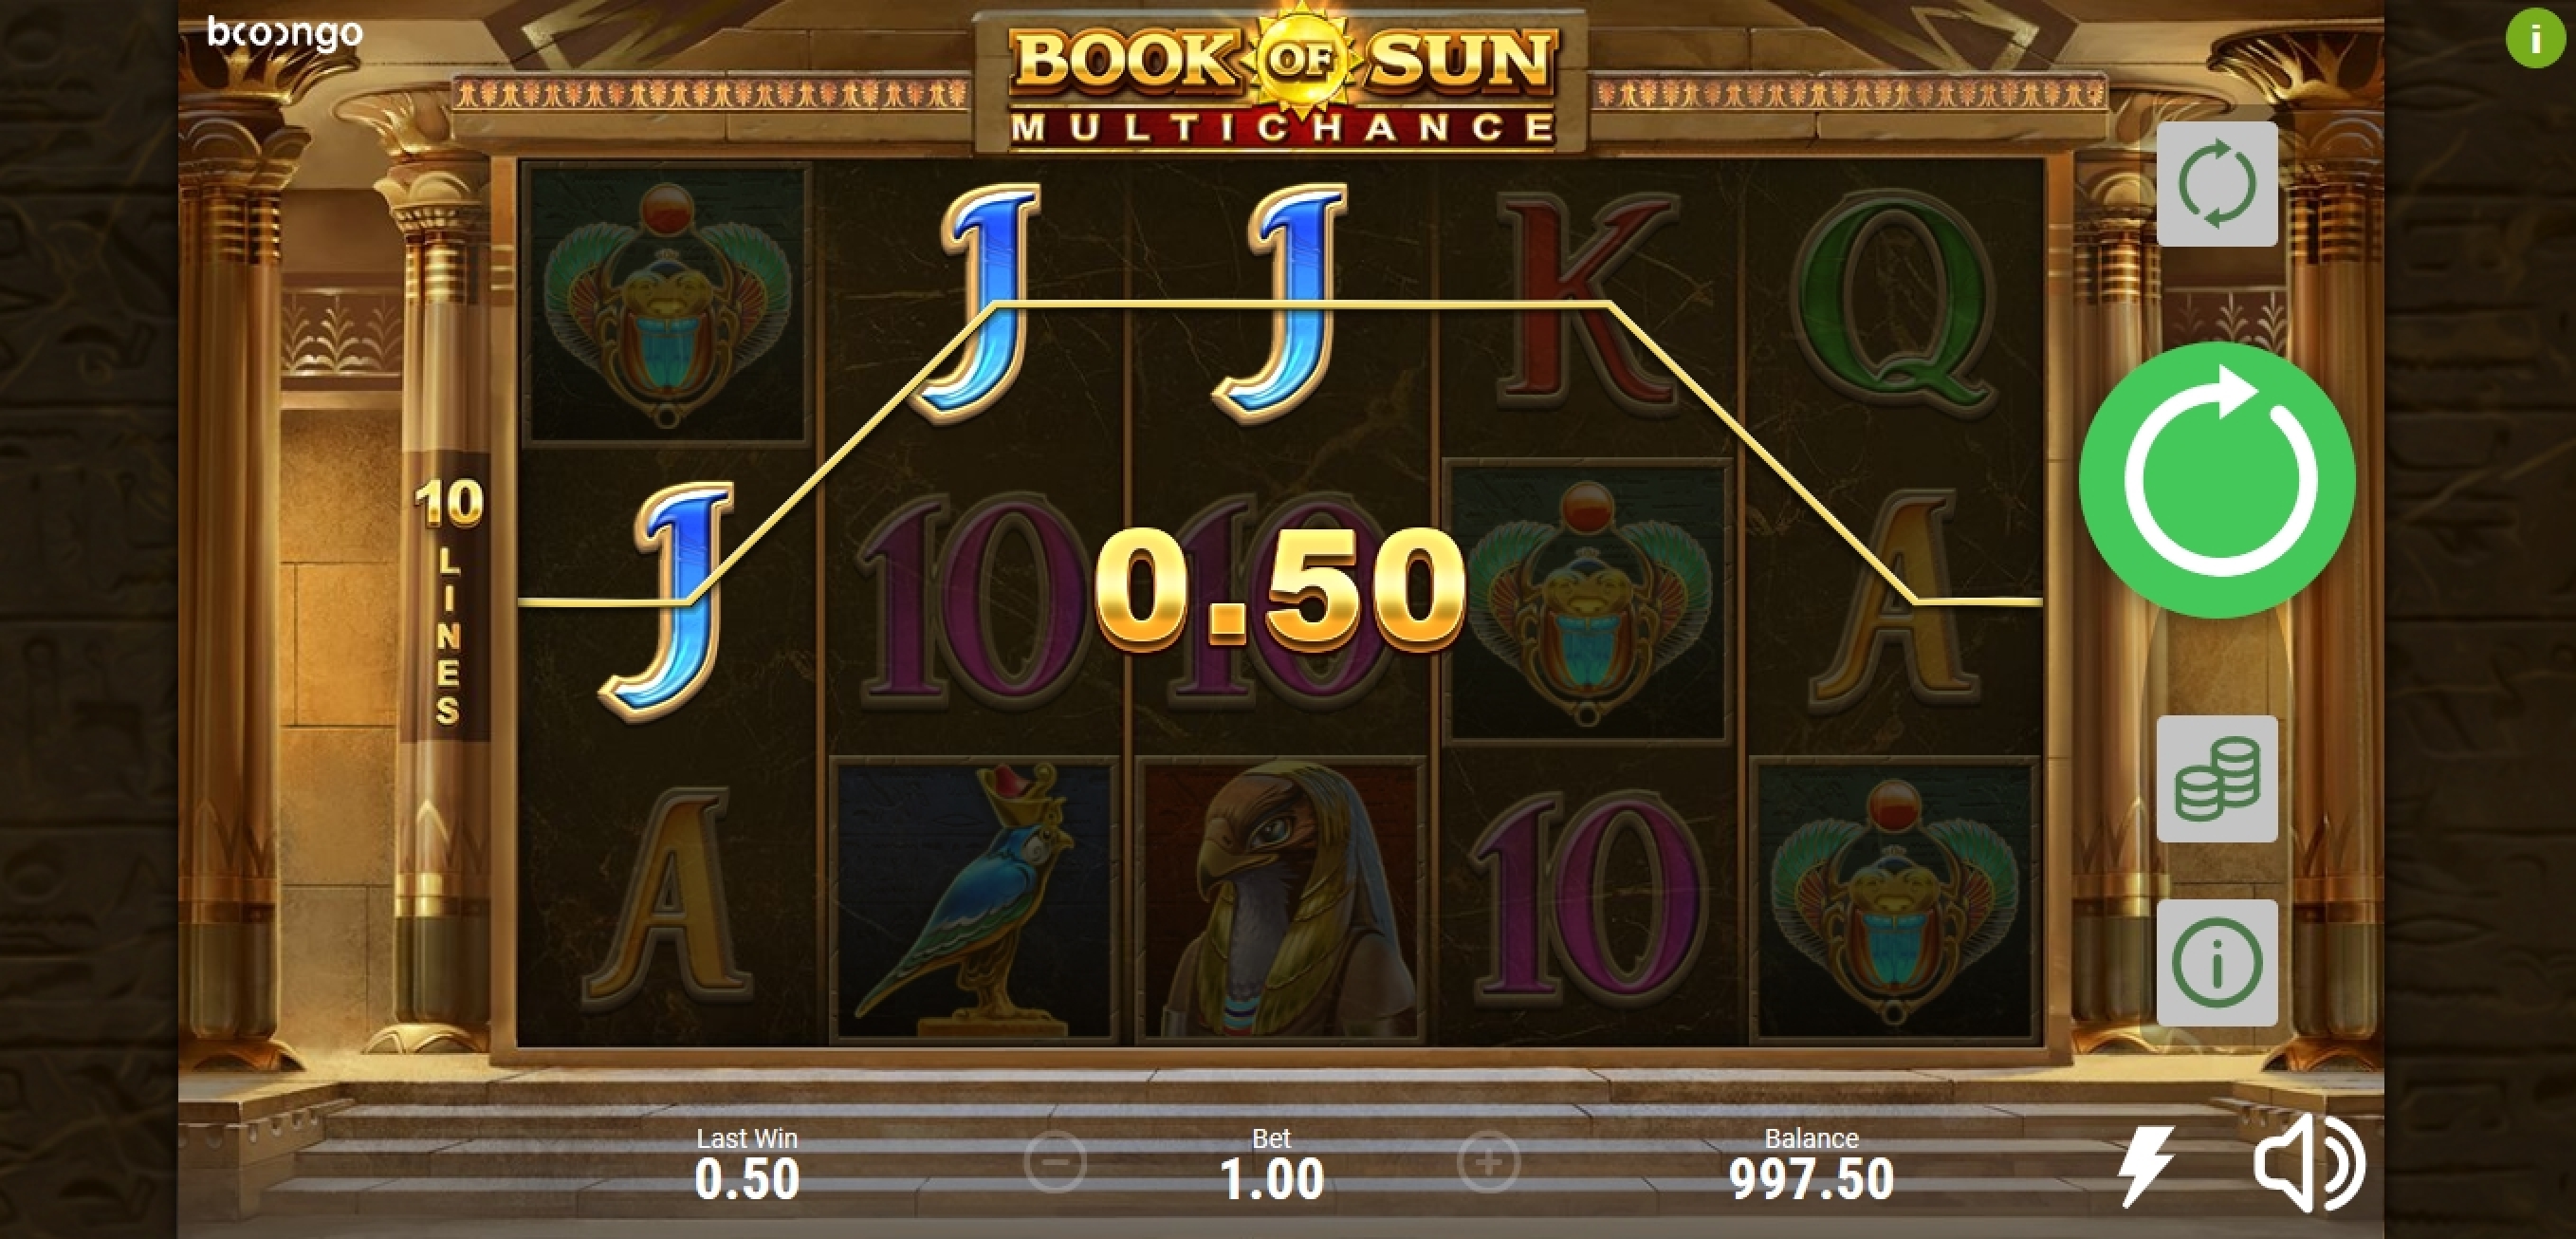 Win Money in Book of Sun: Multi Chance Free Slot Game by Booongo Gaming